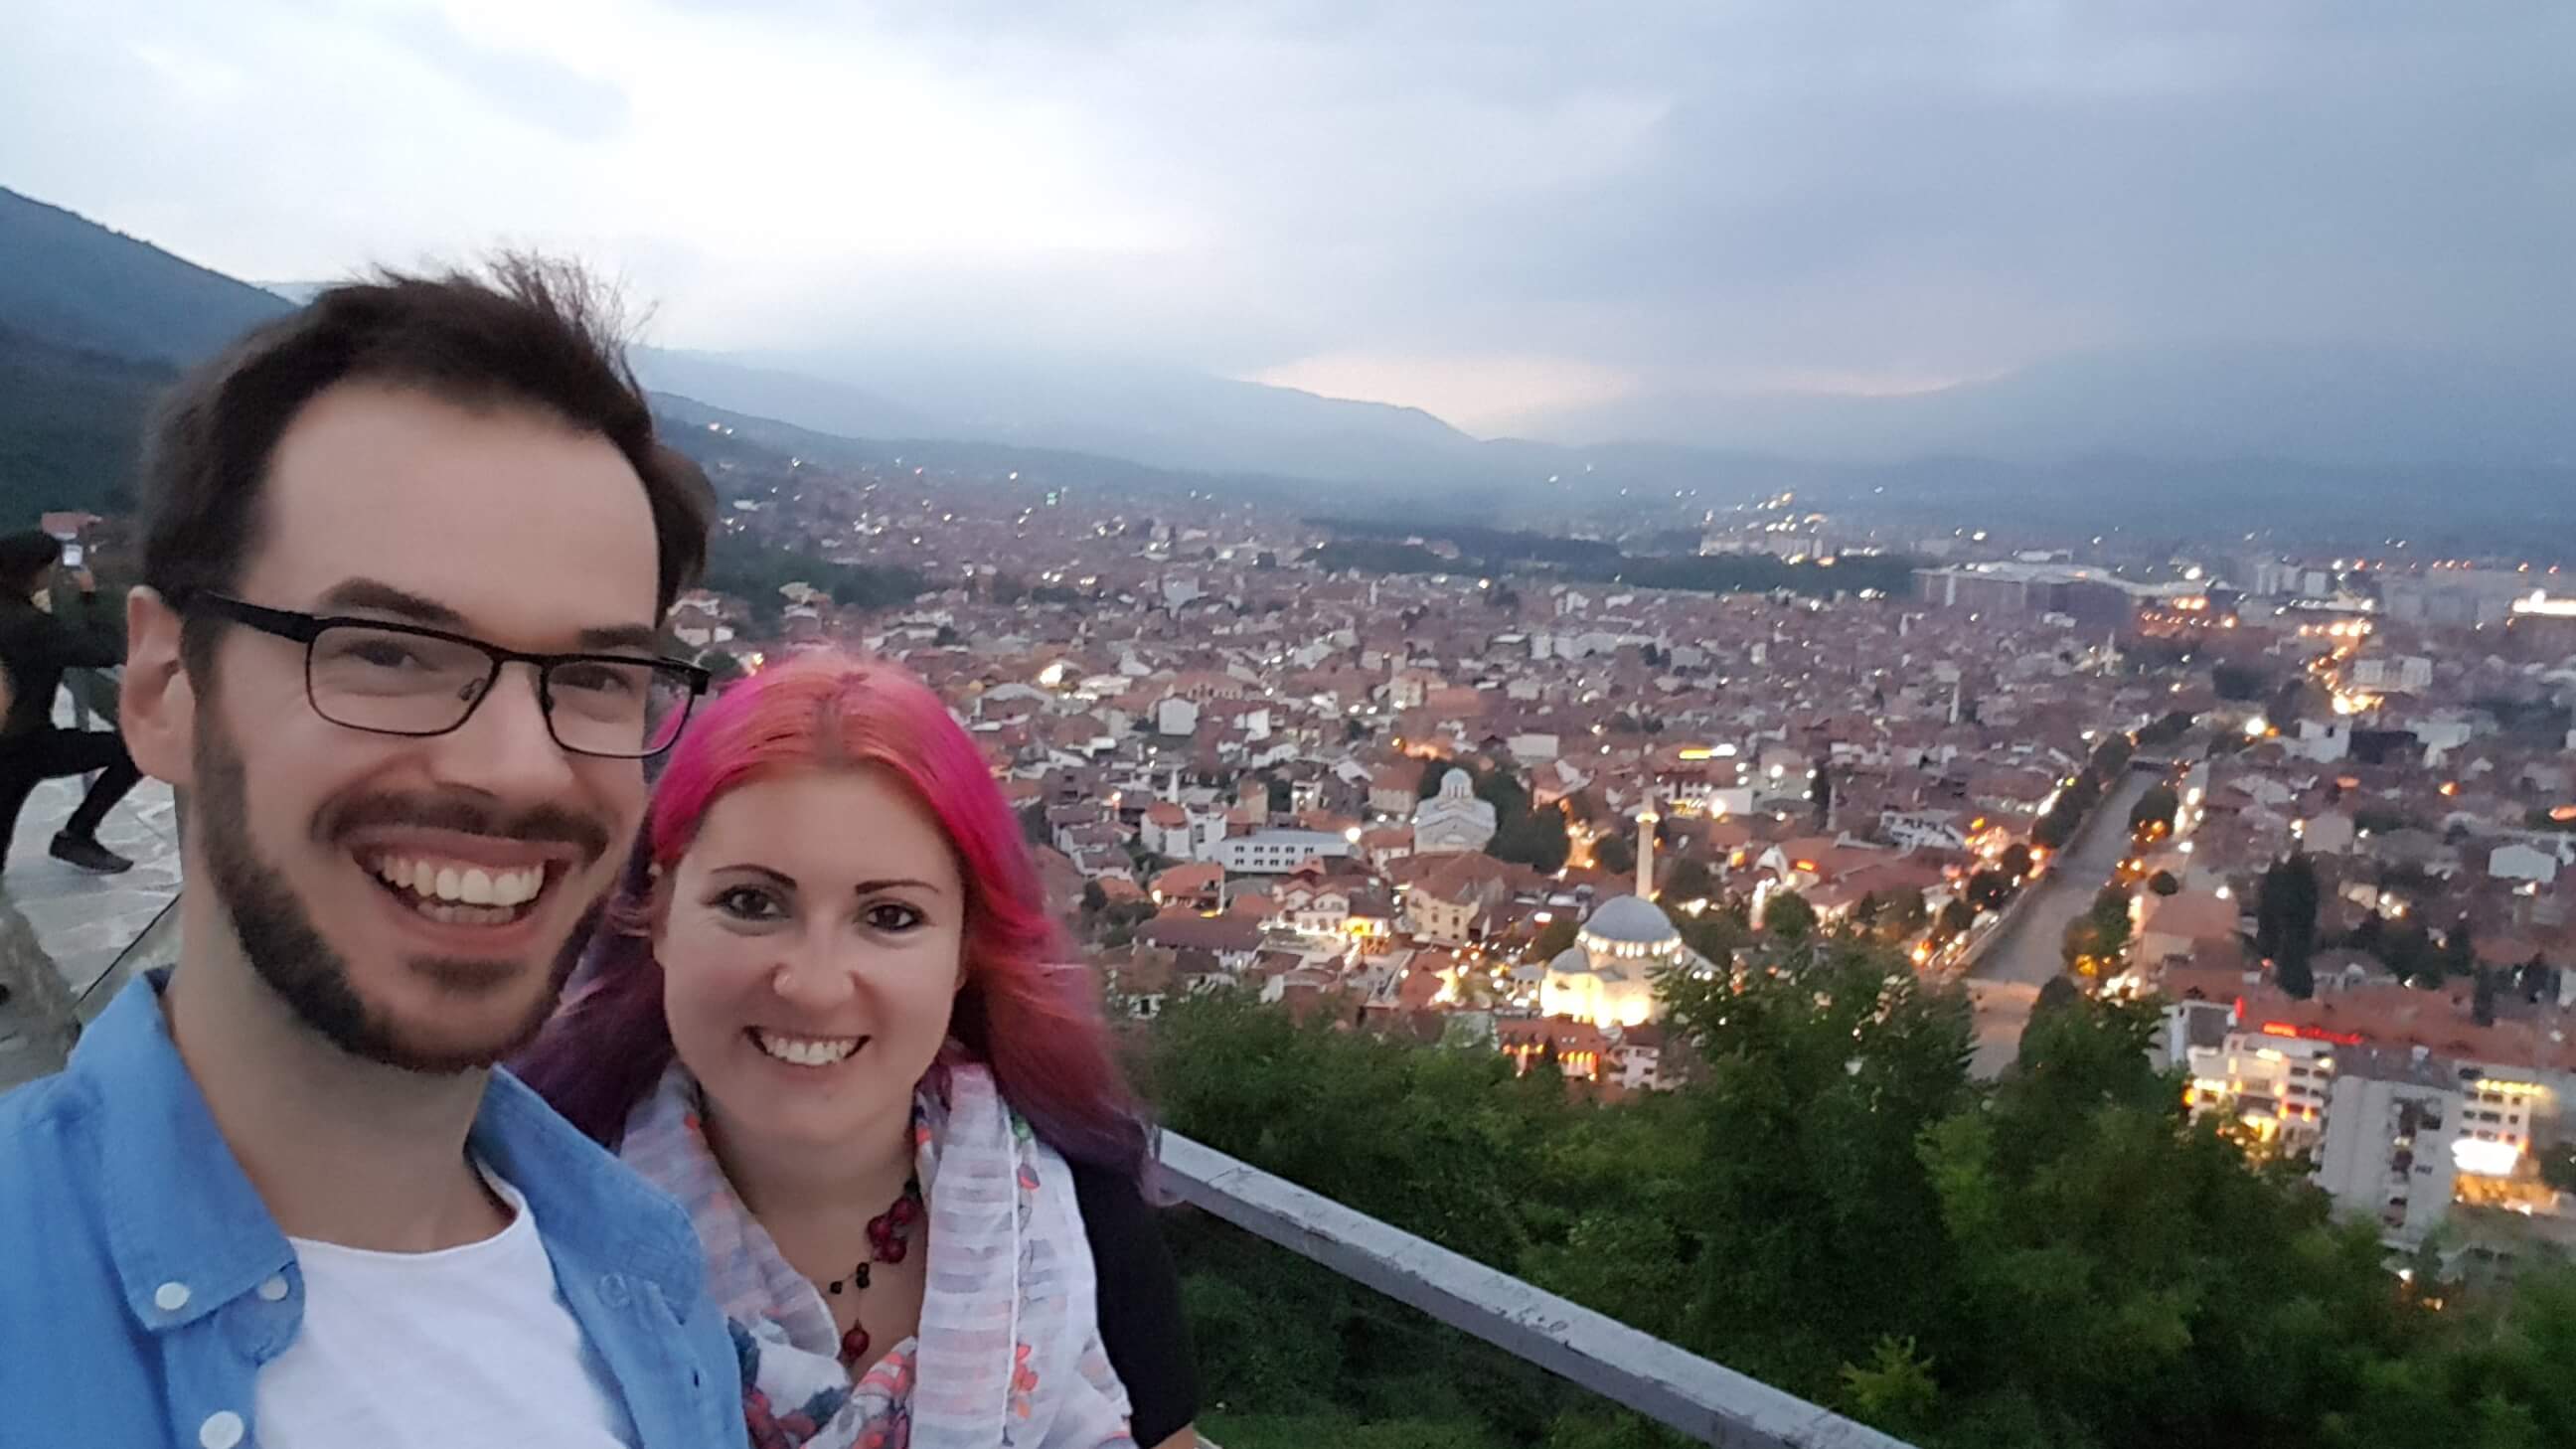 Reasons to add Prizren to a Balkans itinerary: the people